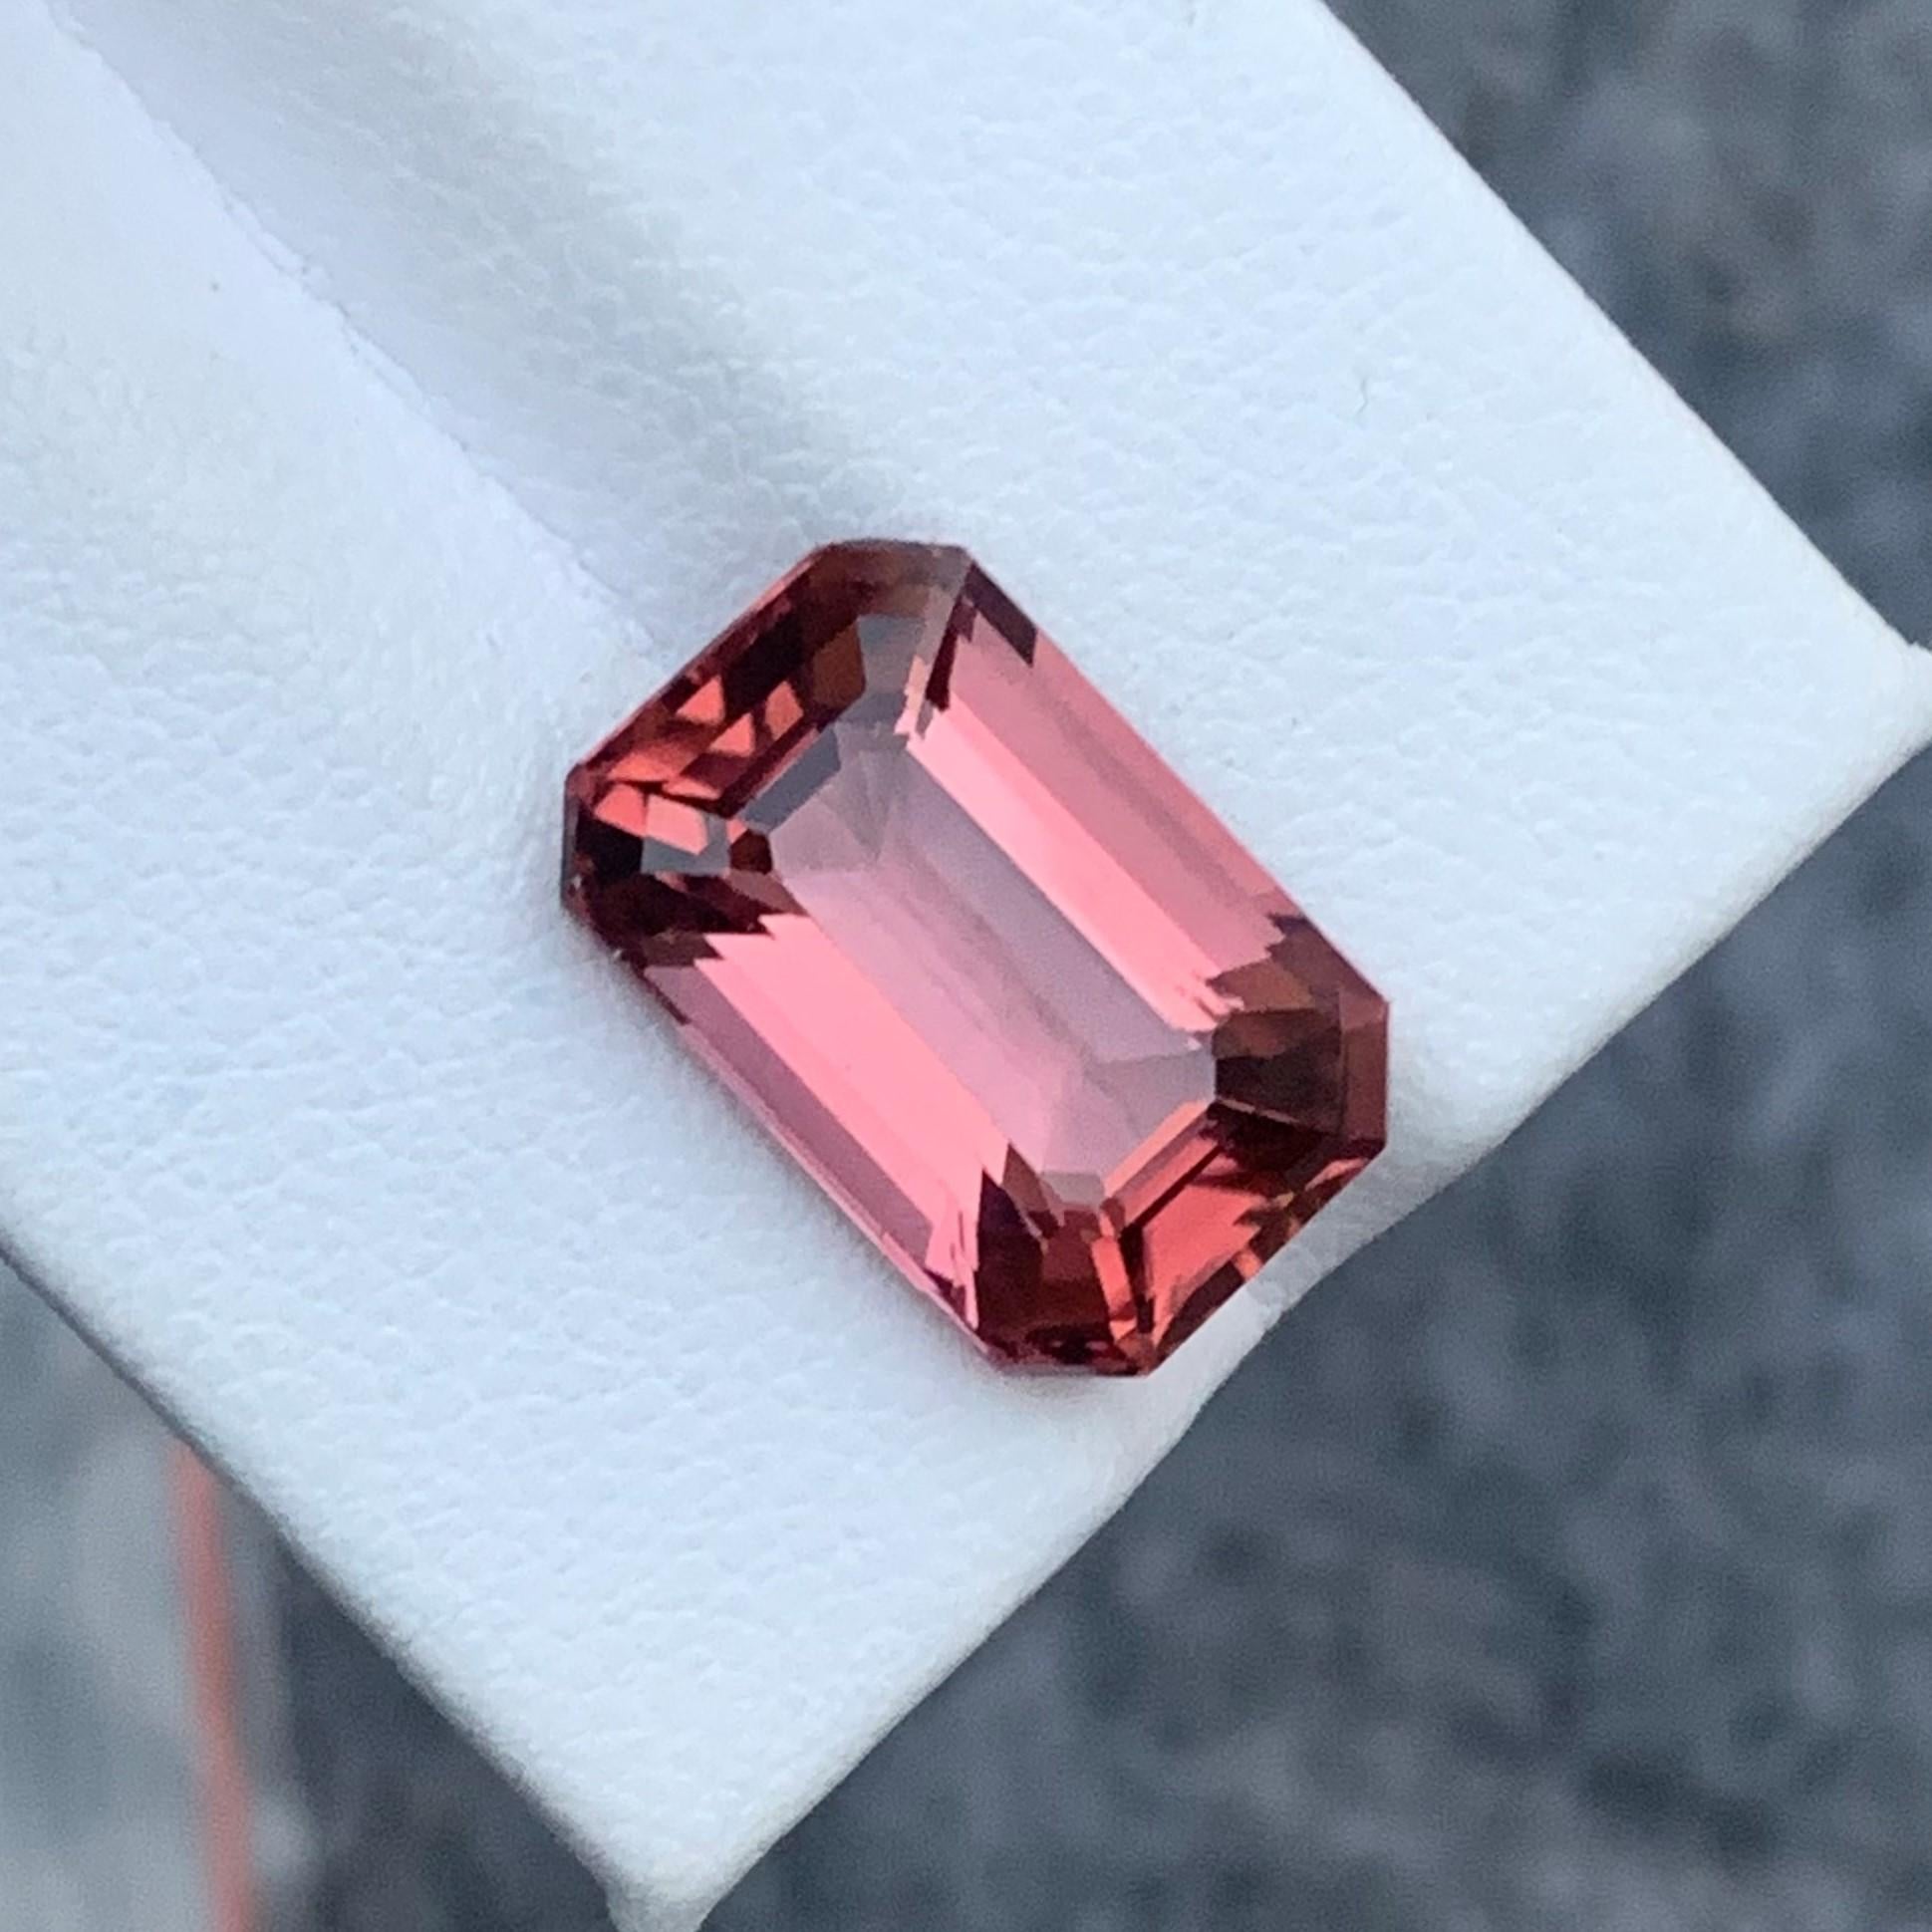 Faceted Tourmaline
Weight: 9.0 Carats
Dimension: 15.3x9.9x7.4 Mm
Origin: Afghanistan
Color: Pink
Shape: Long Emerald Cut
Clarity: Eye Clean
Certificate: On Demand

With a rating between 7 and 7.5 on the Mohs scale of mineral hardness, tourmaline